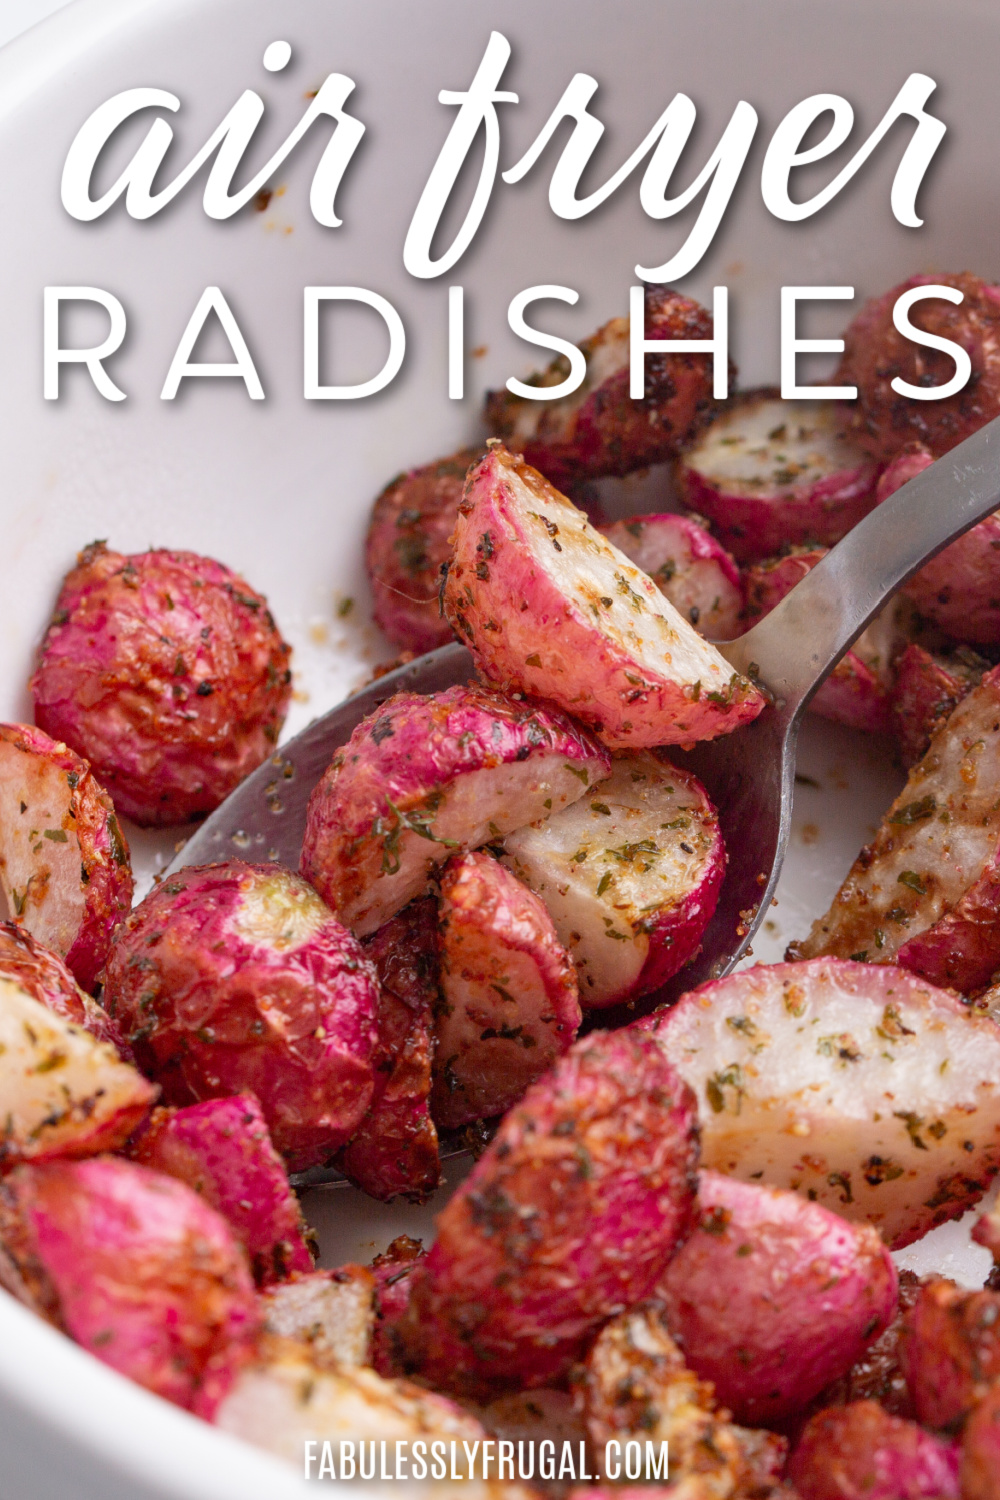 https://fabulesslyfrugal.com/wp-content/uploads/2023/03/97_how-to-make-radishes-in-the-air-fryer-3.jpg